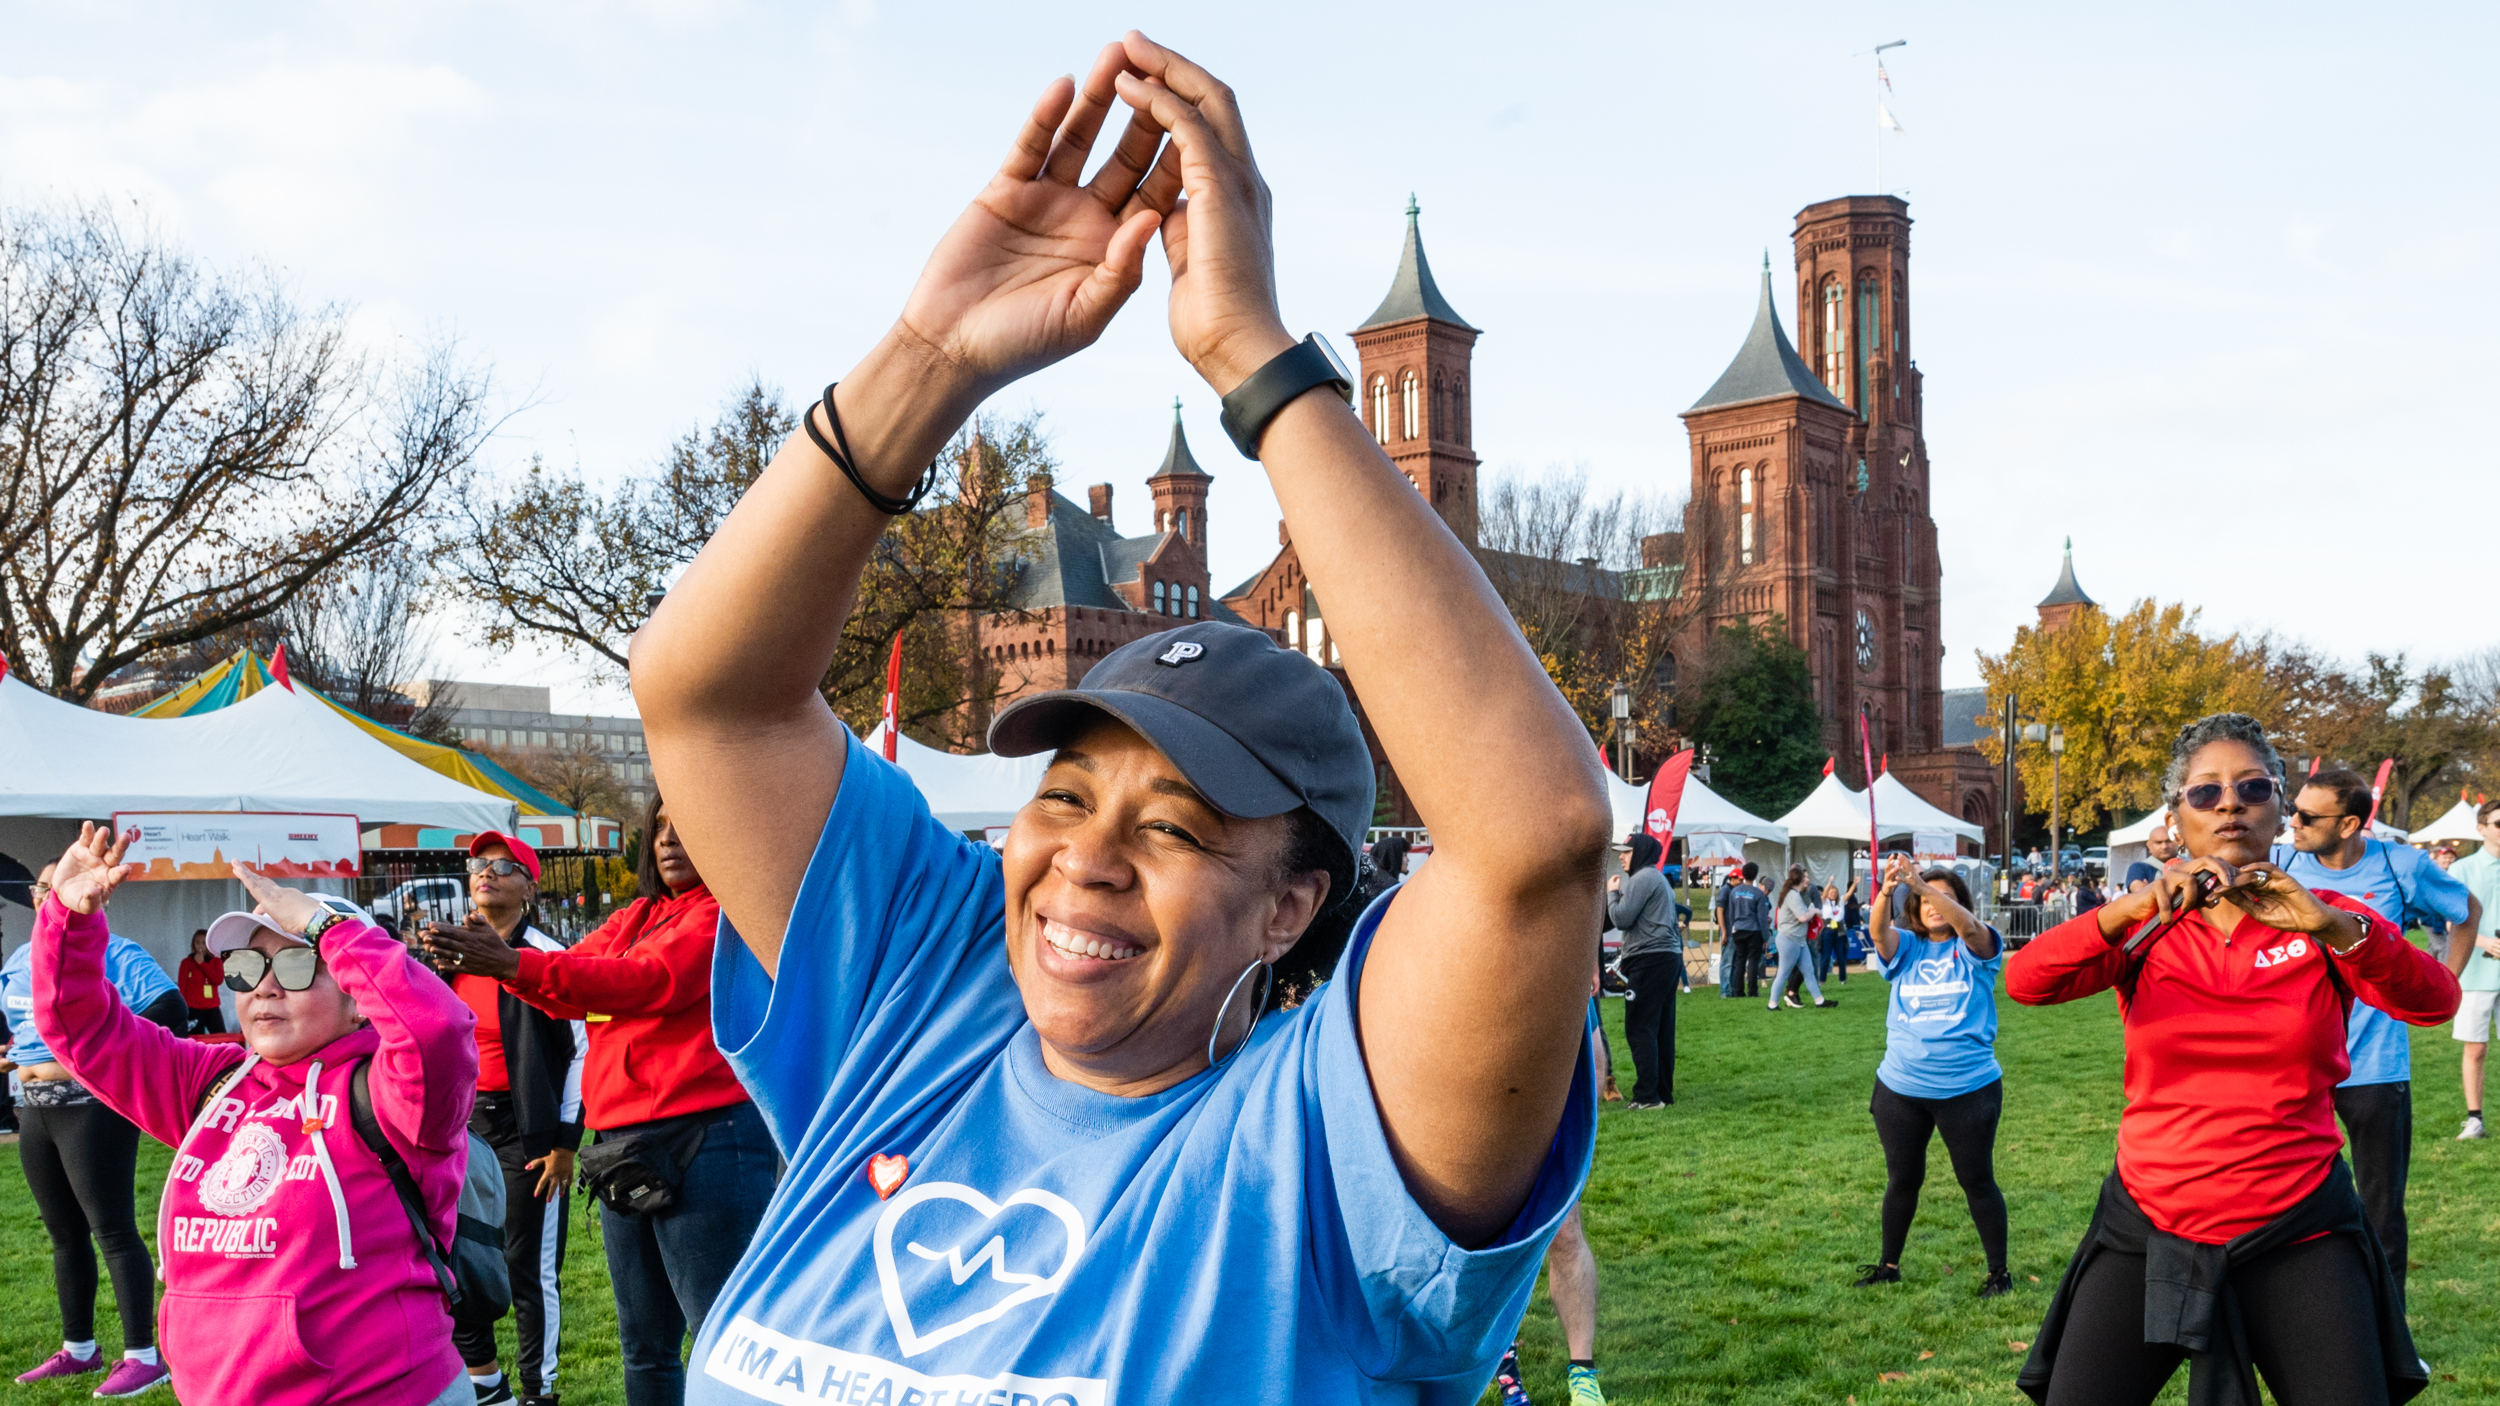 Thousands Step Out to Save and Improve Lives Across the Greater Washington Region